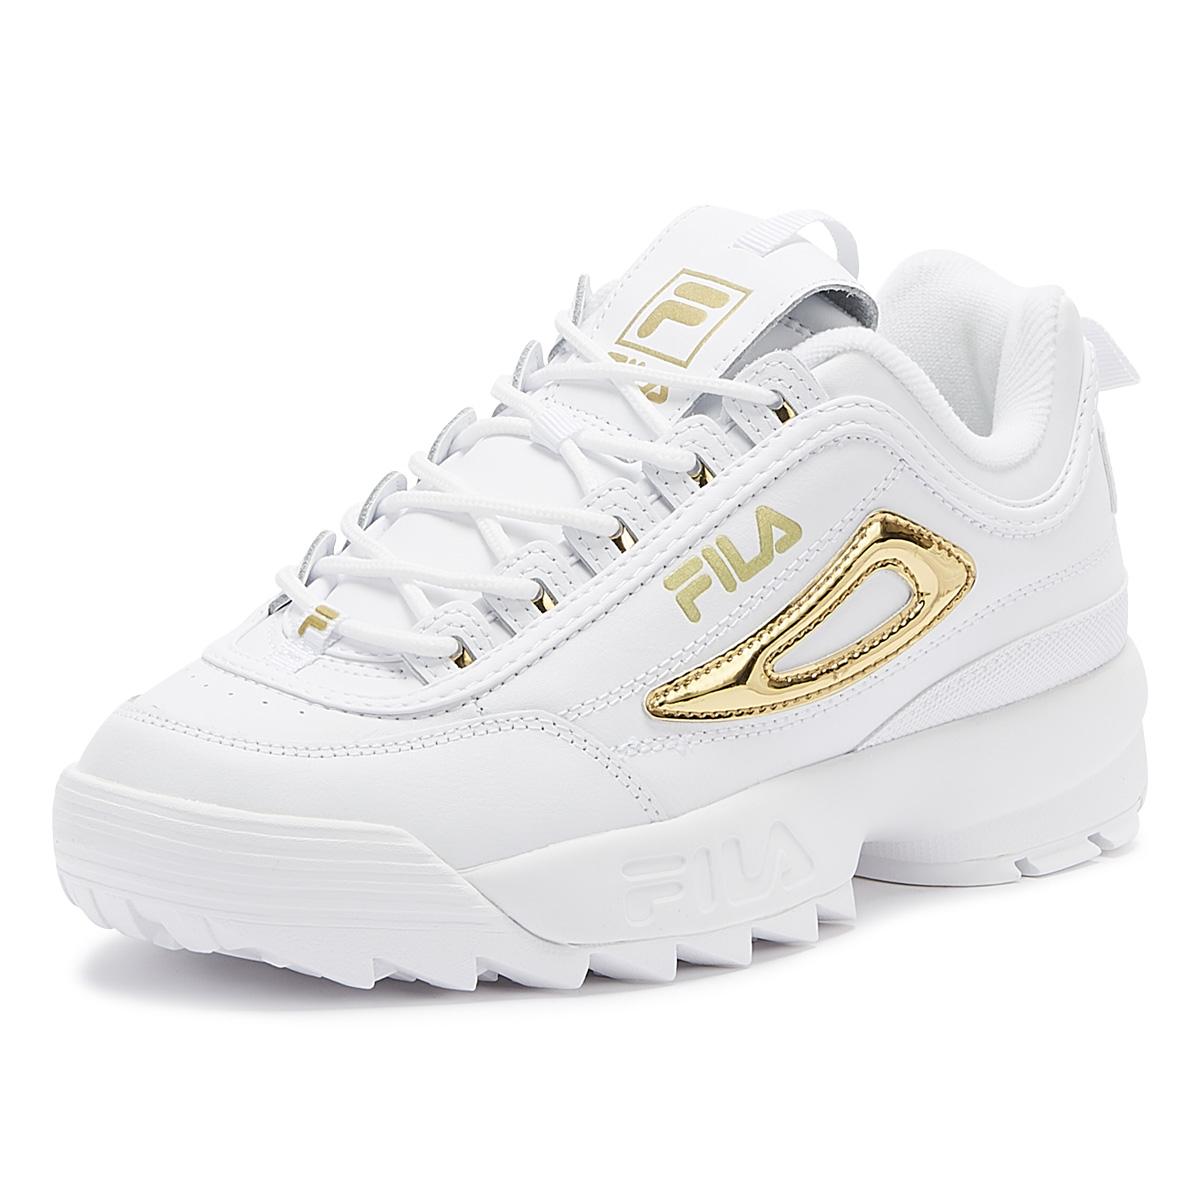 Fila Leather Disruptor Ii Metallic Accent Womens White / Gold Trainers ...